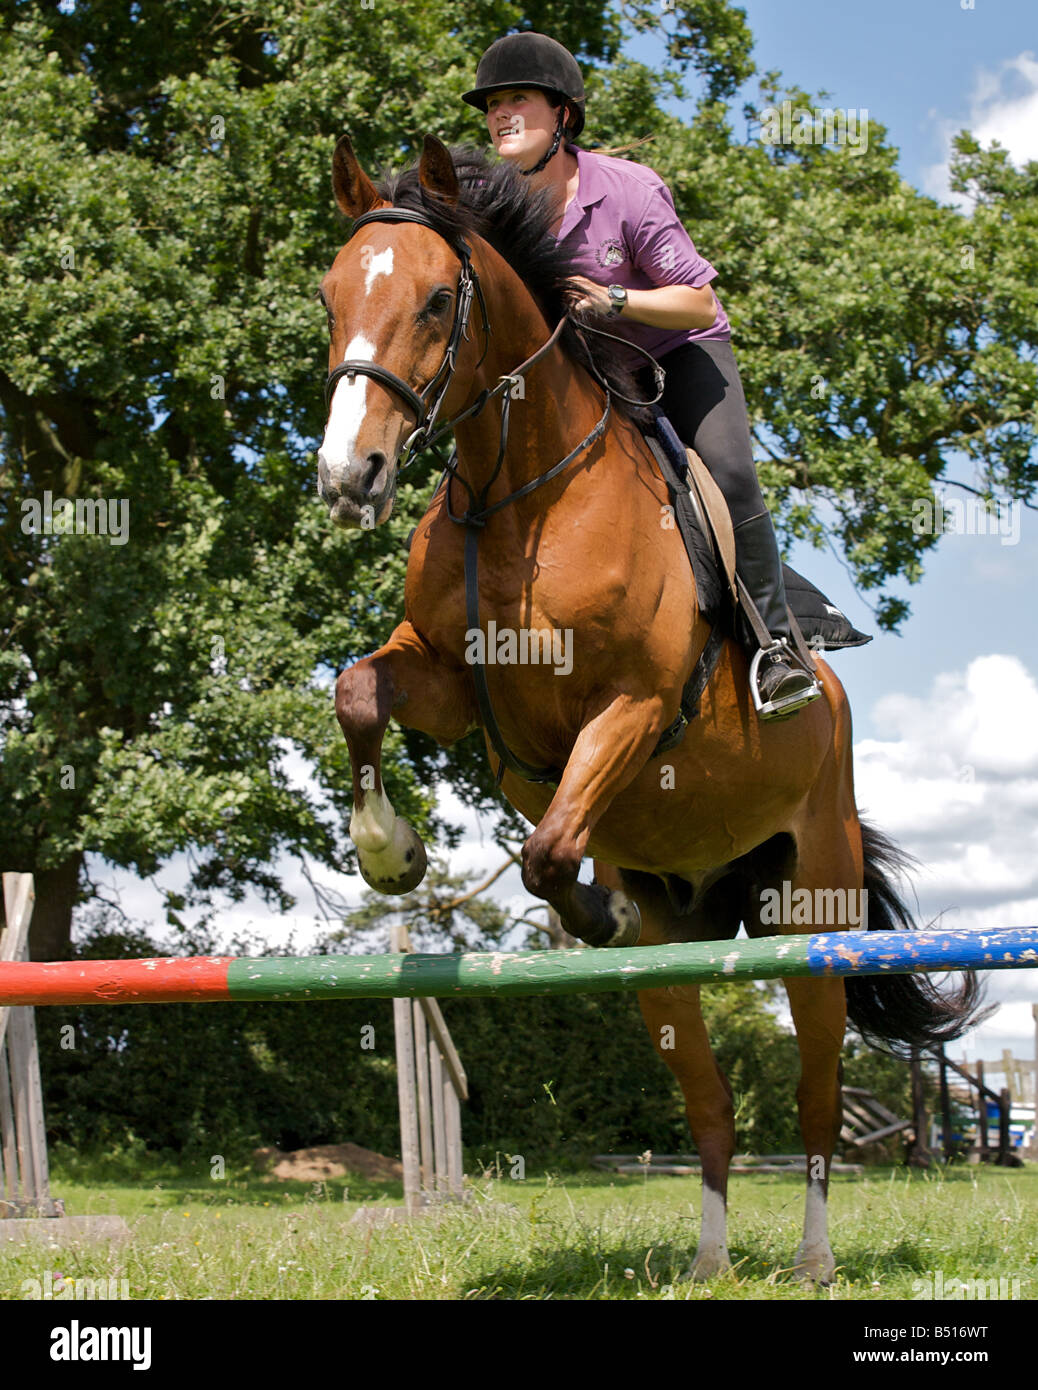 Rider and horse jumping. Stock Photo